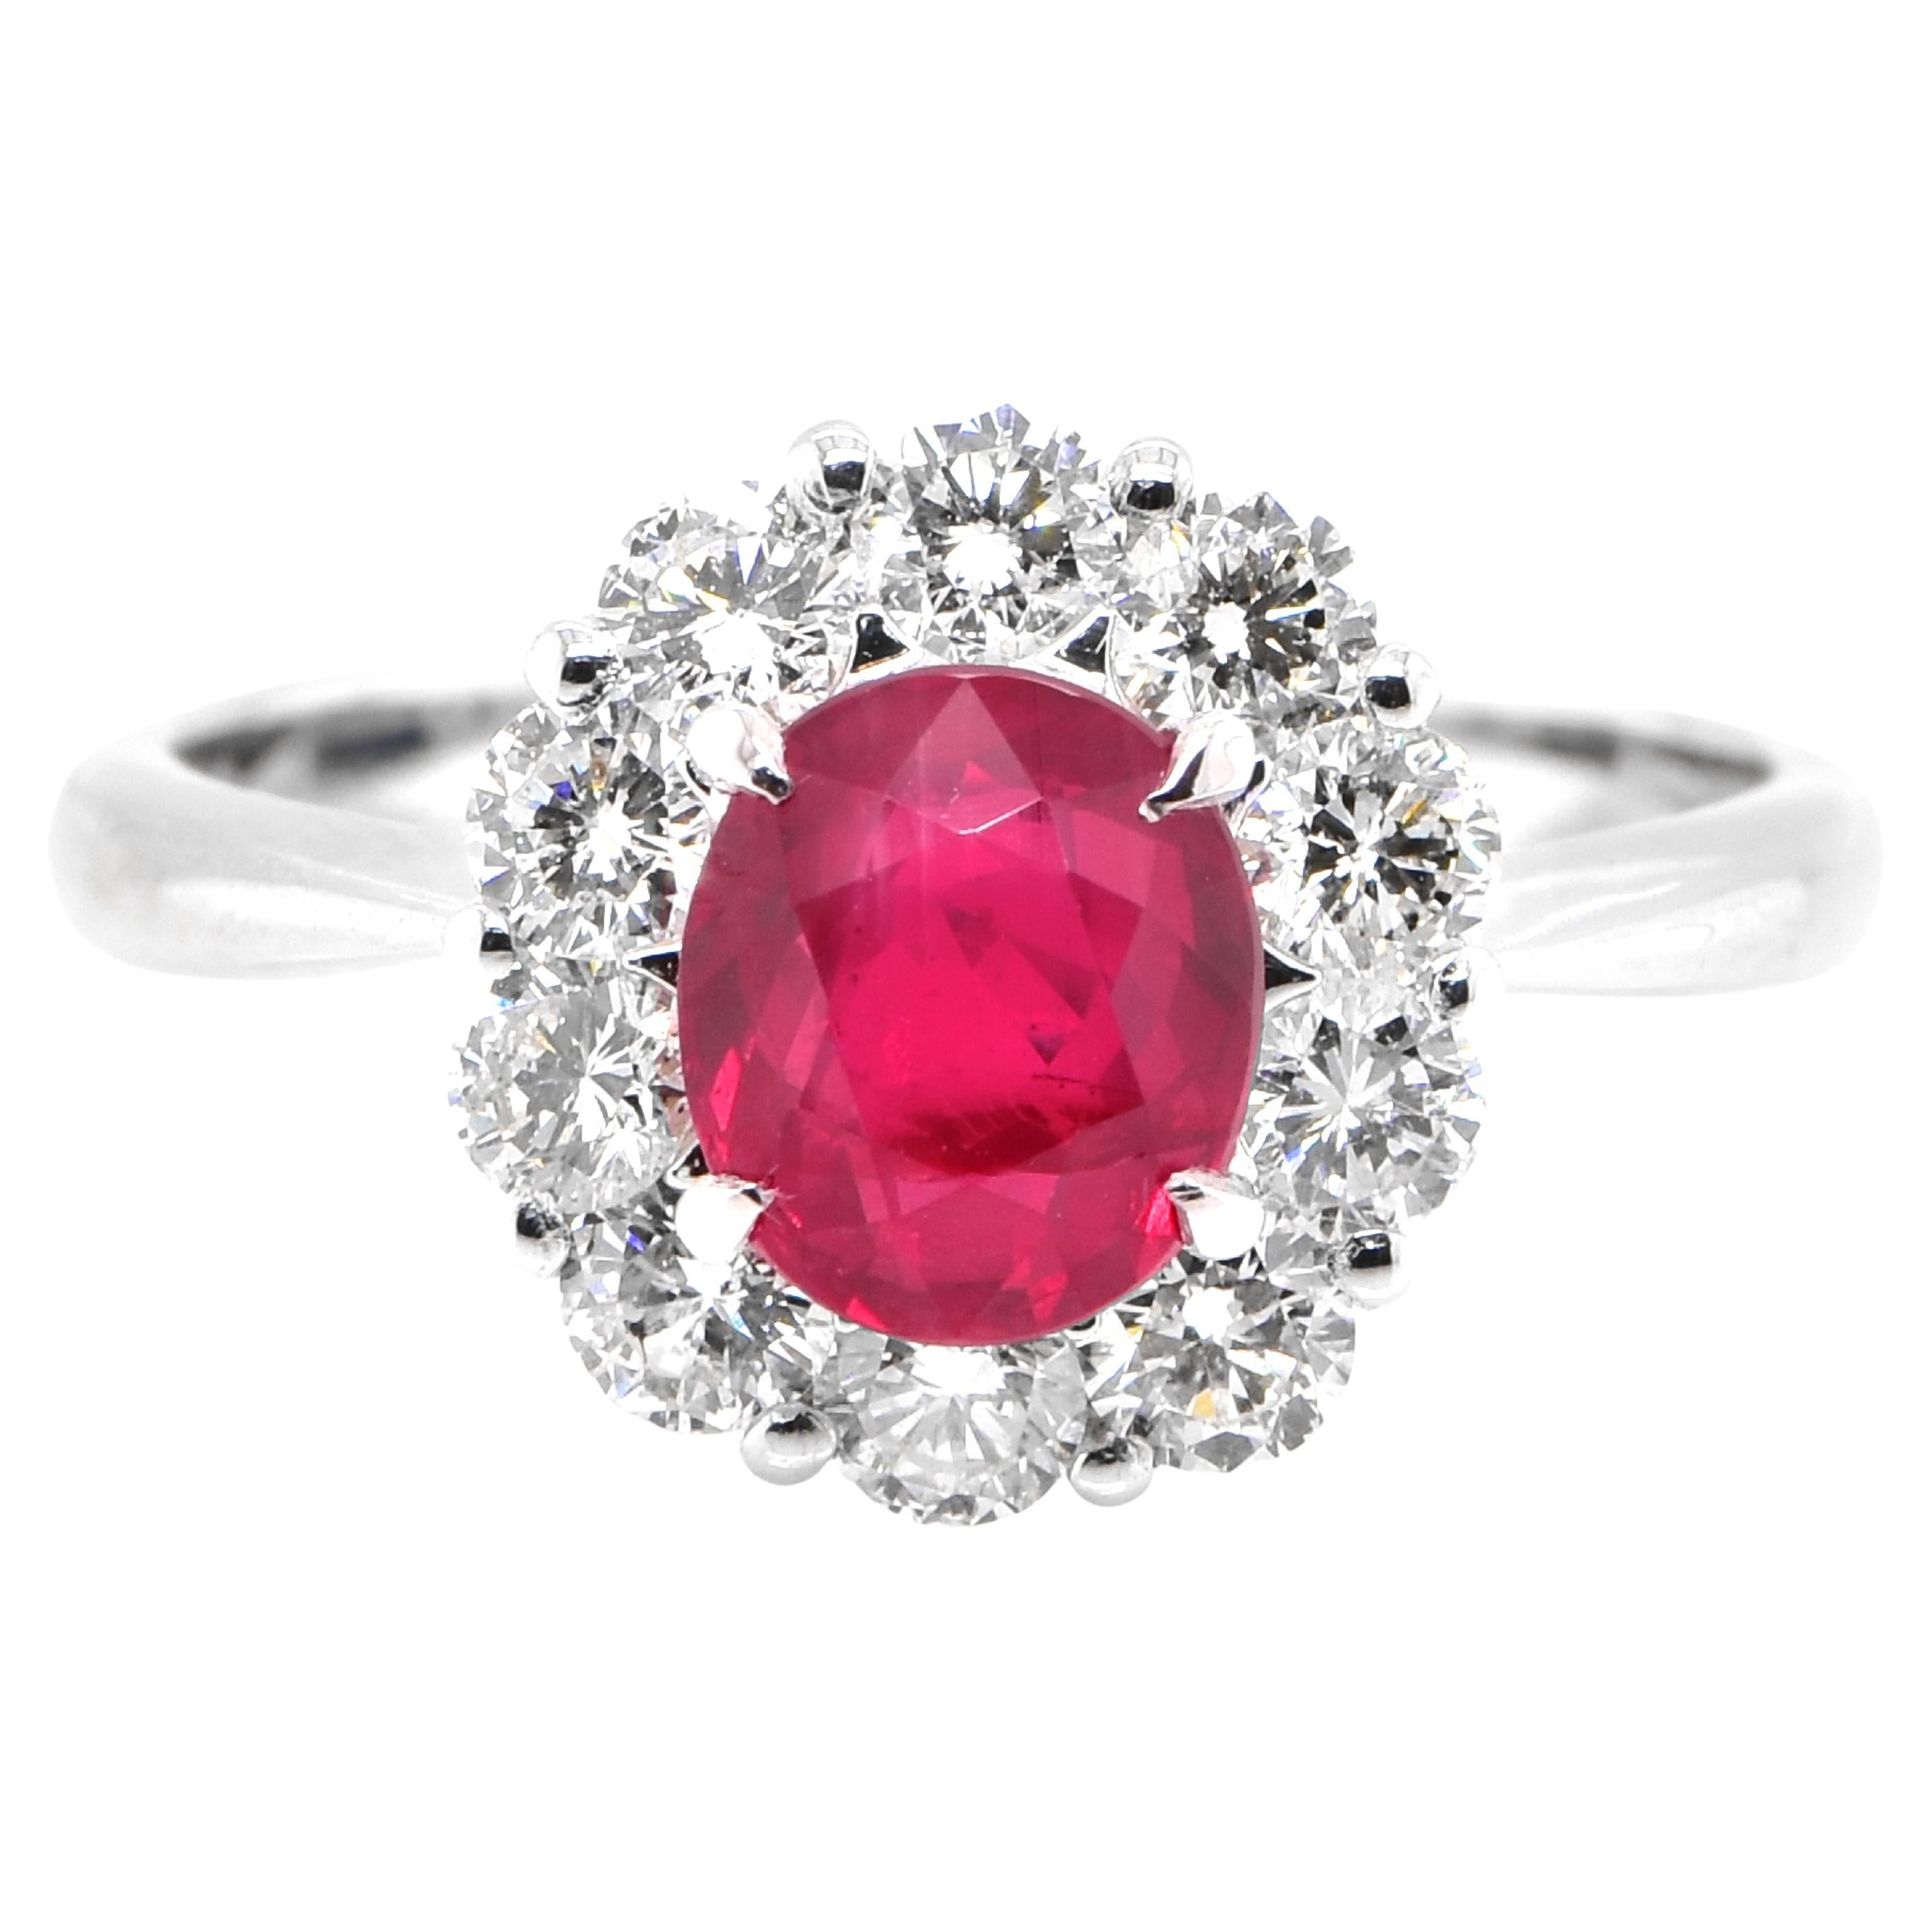 AIGS Certified 1.39 Carat Untreated Ruby and Diamond Ring Made in Platinum For Sale